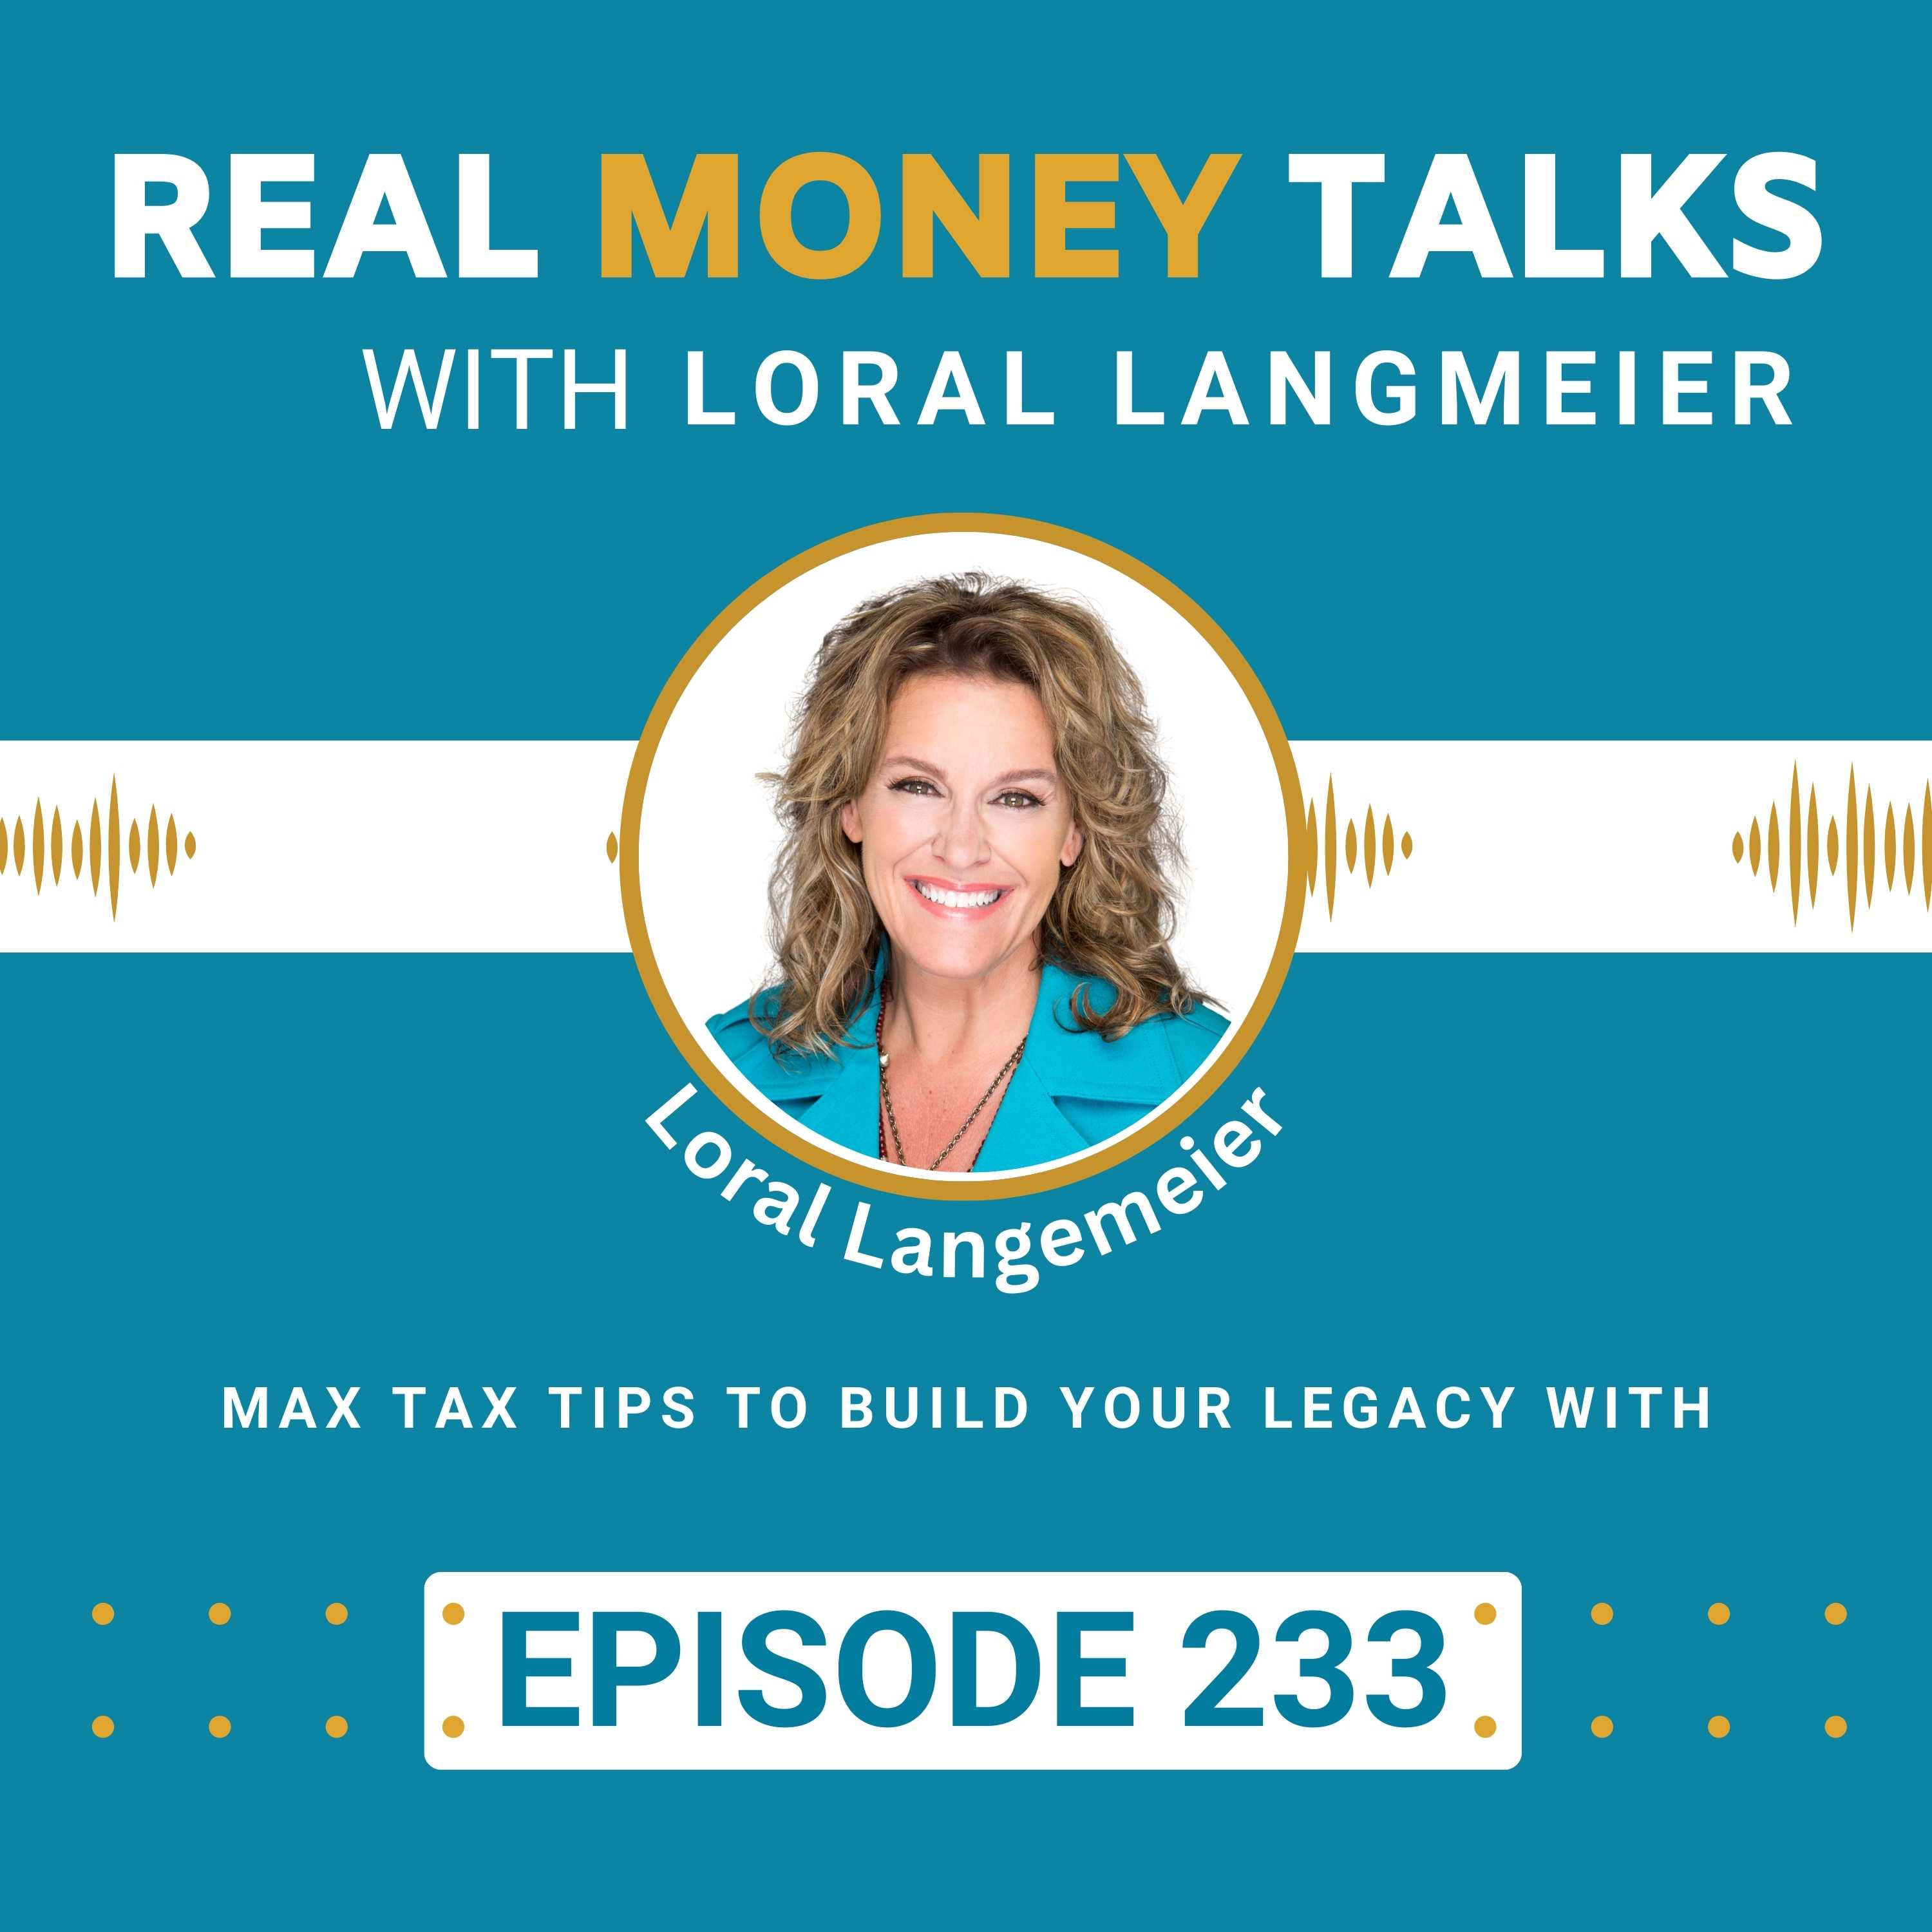 Max Tax Tips To Build Your Legacy With | RMT233